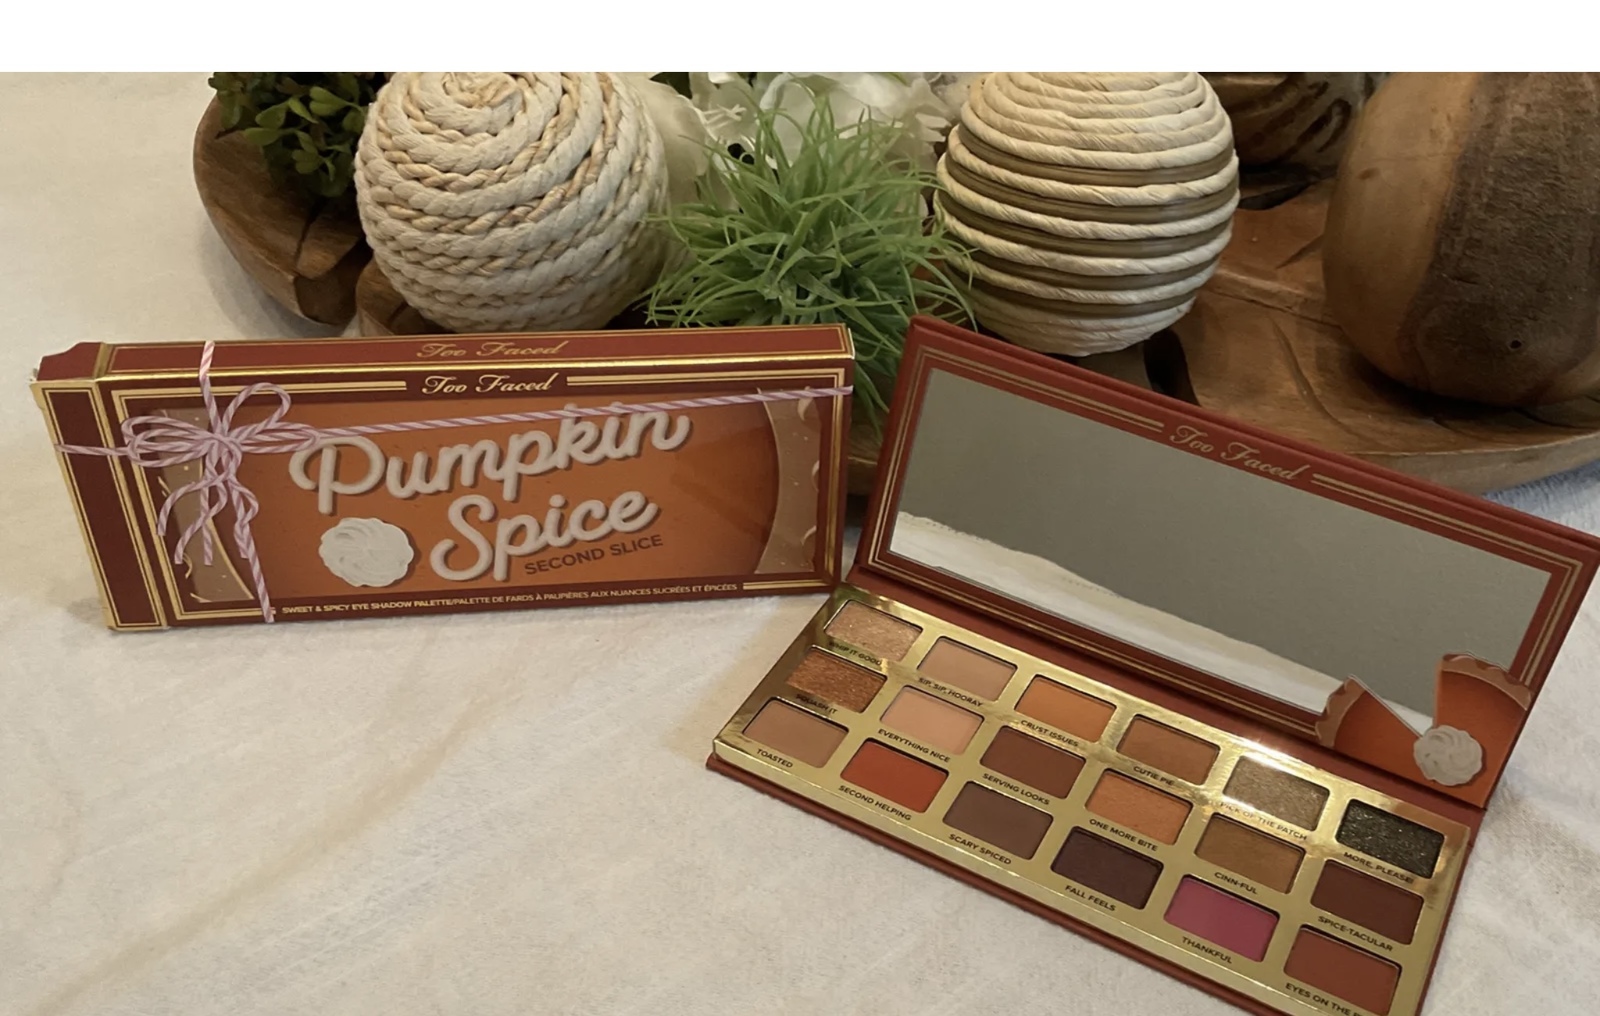 Too Faced Pumpkin Spice Second  Slice Eyeshadow Palette 2022 Holiday Authentic - $24.99